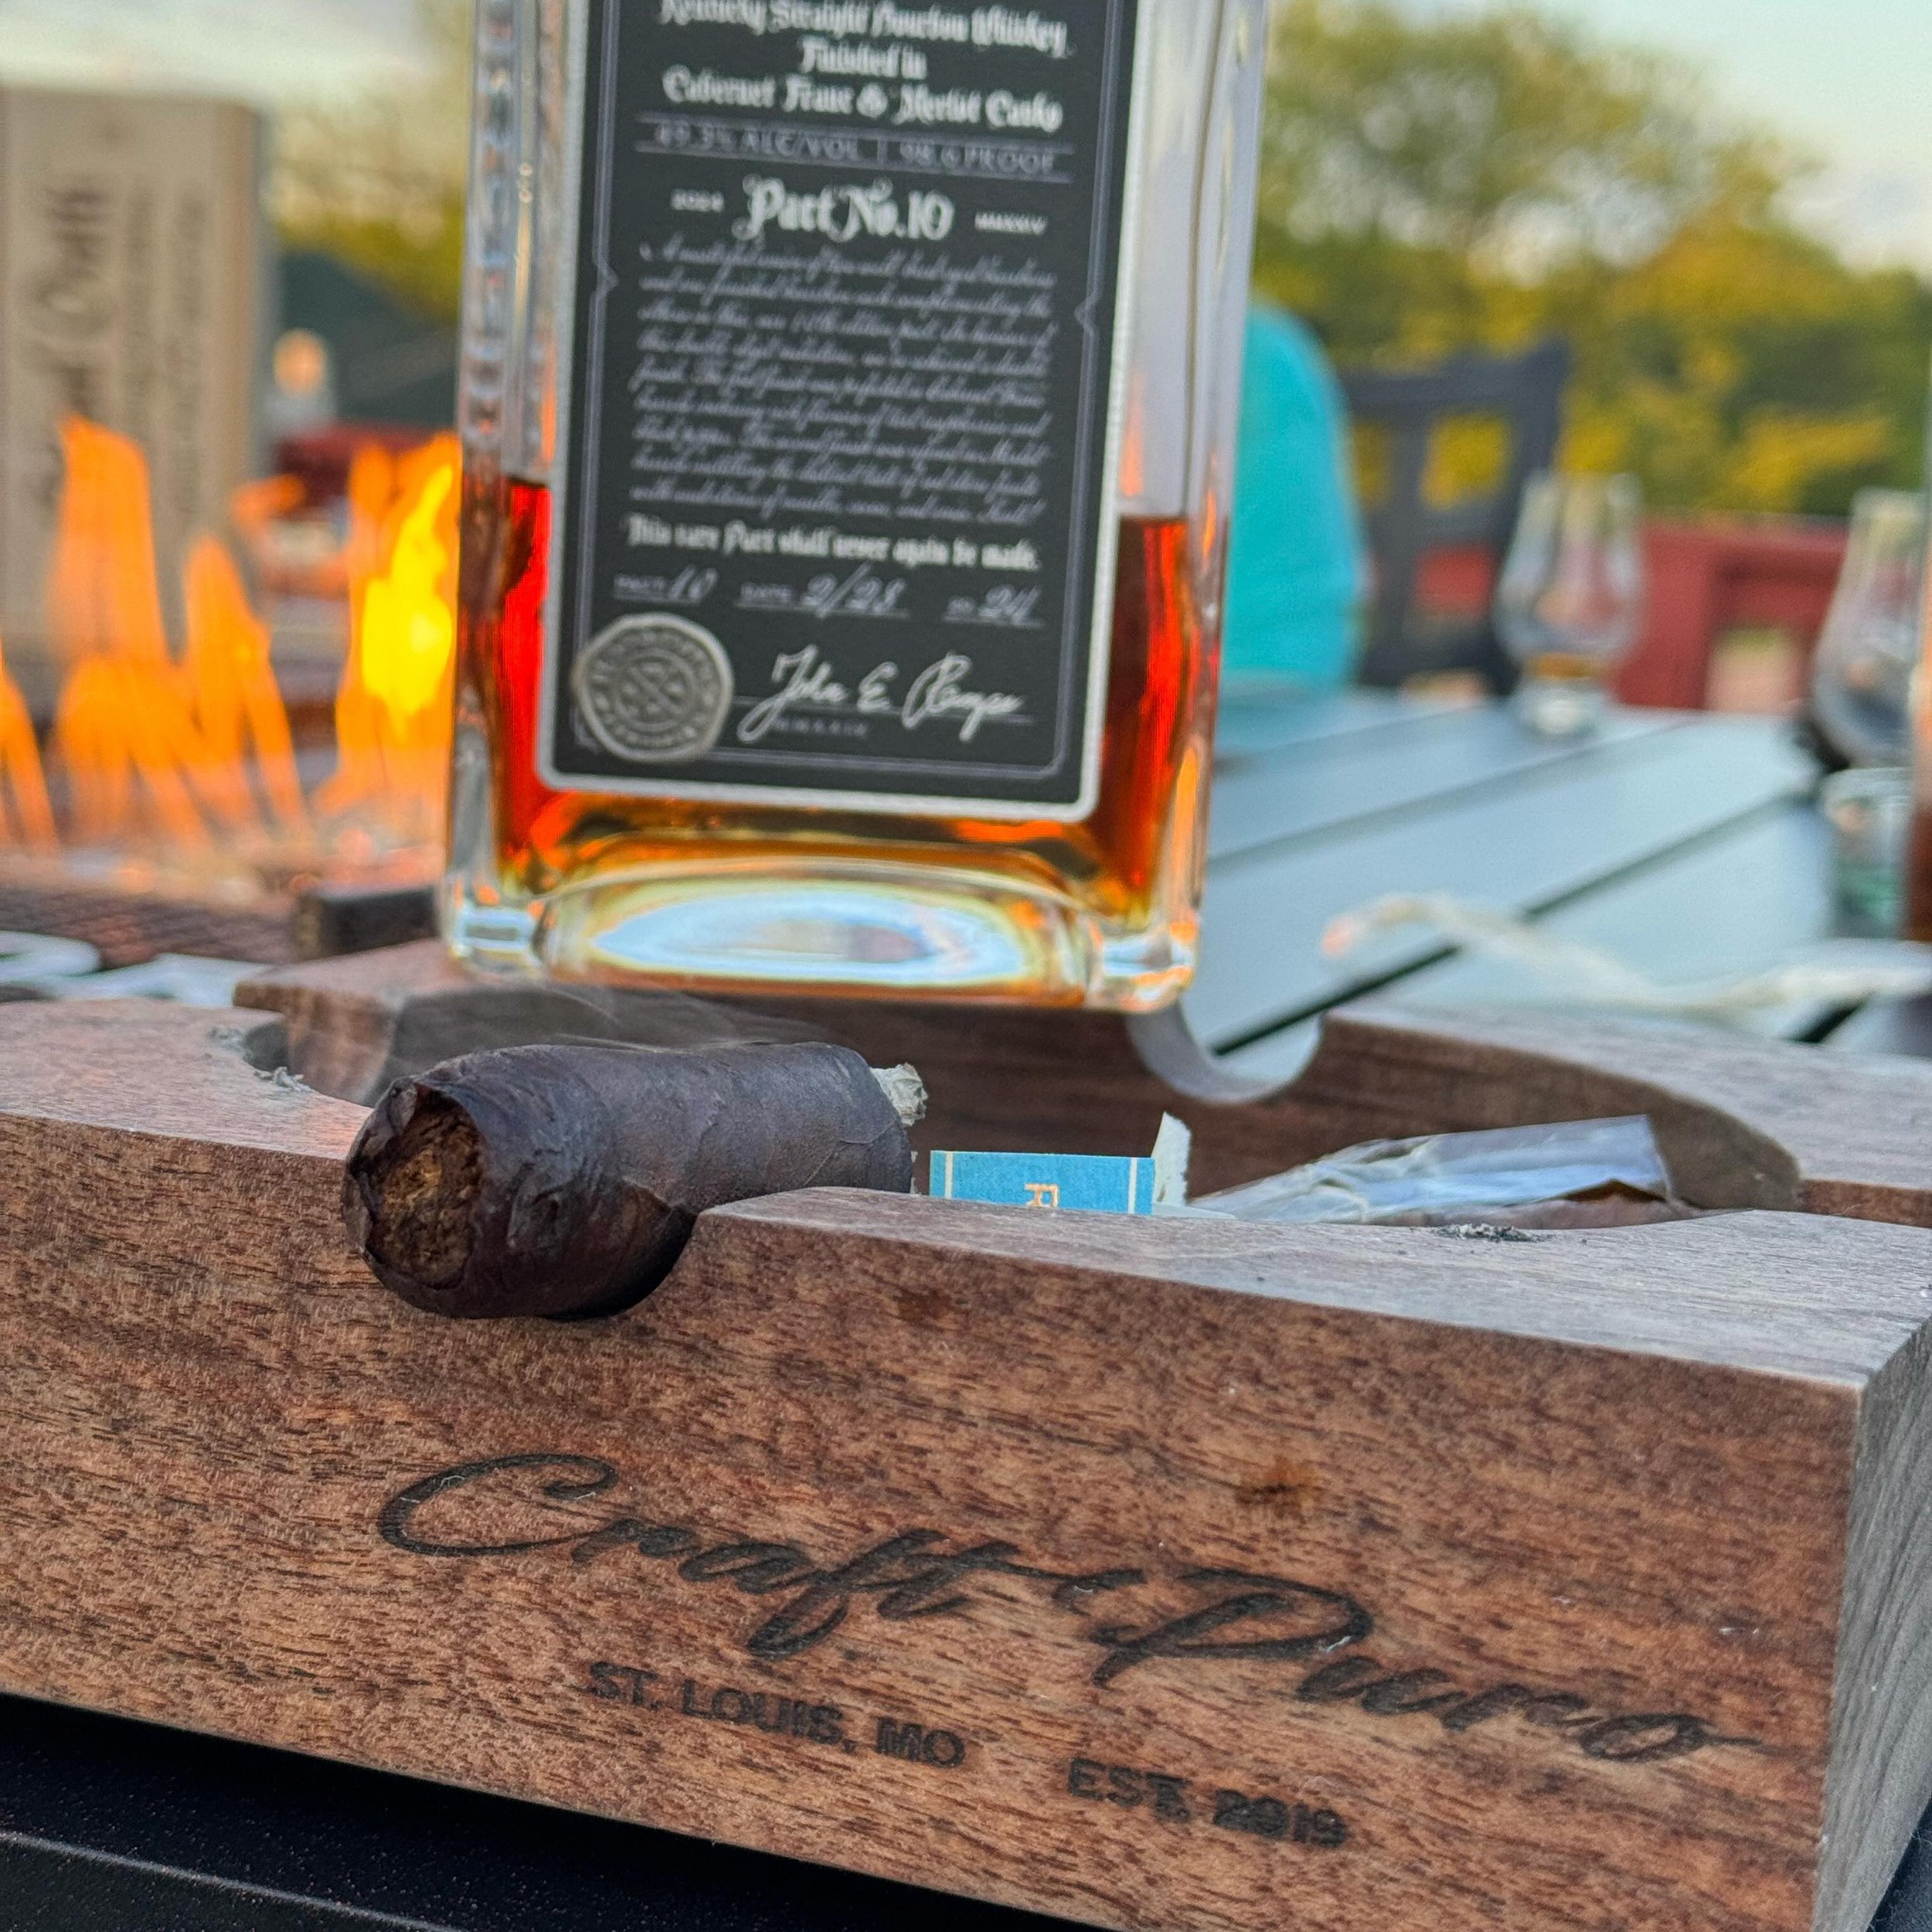 @luxrowdistillers Blood Oath Pact X is now shipping, it pairs amazingly well with the richness and spice of a Nicaraguan Puro! The Reaper and all of its body graces this bottle beautifully. All while resting on the best made ashtrays from @woodwrx_st